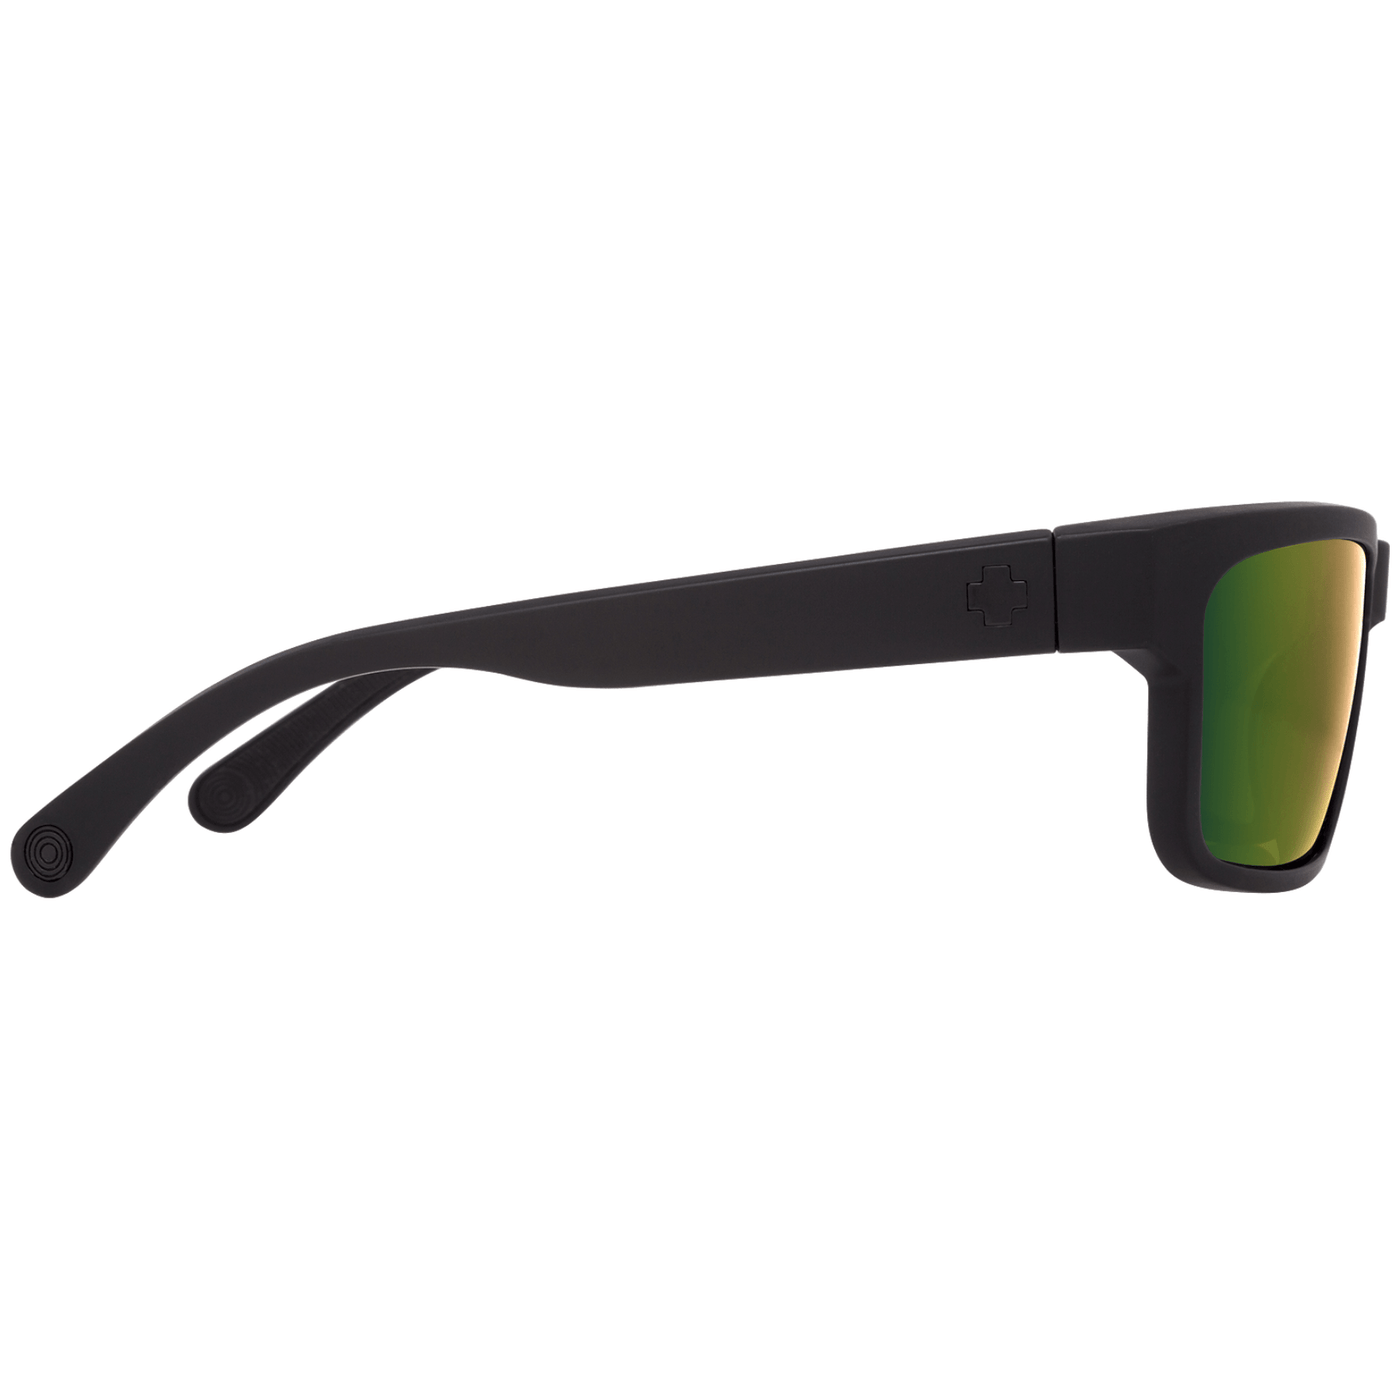 SPY FRAZIER Polarized Sunglasses - Gold 8Lines Shop - Fast Shipping